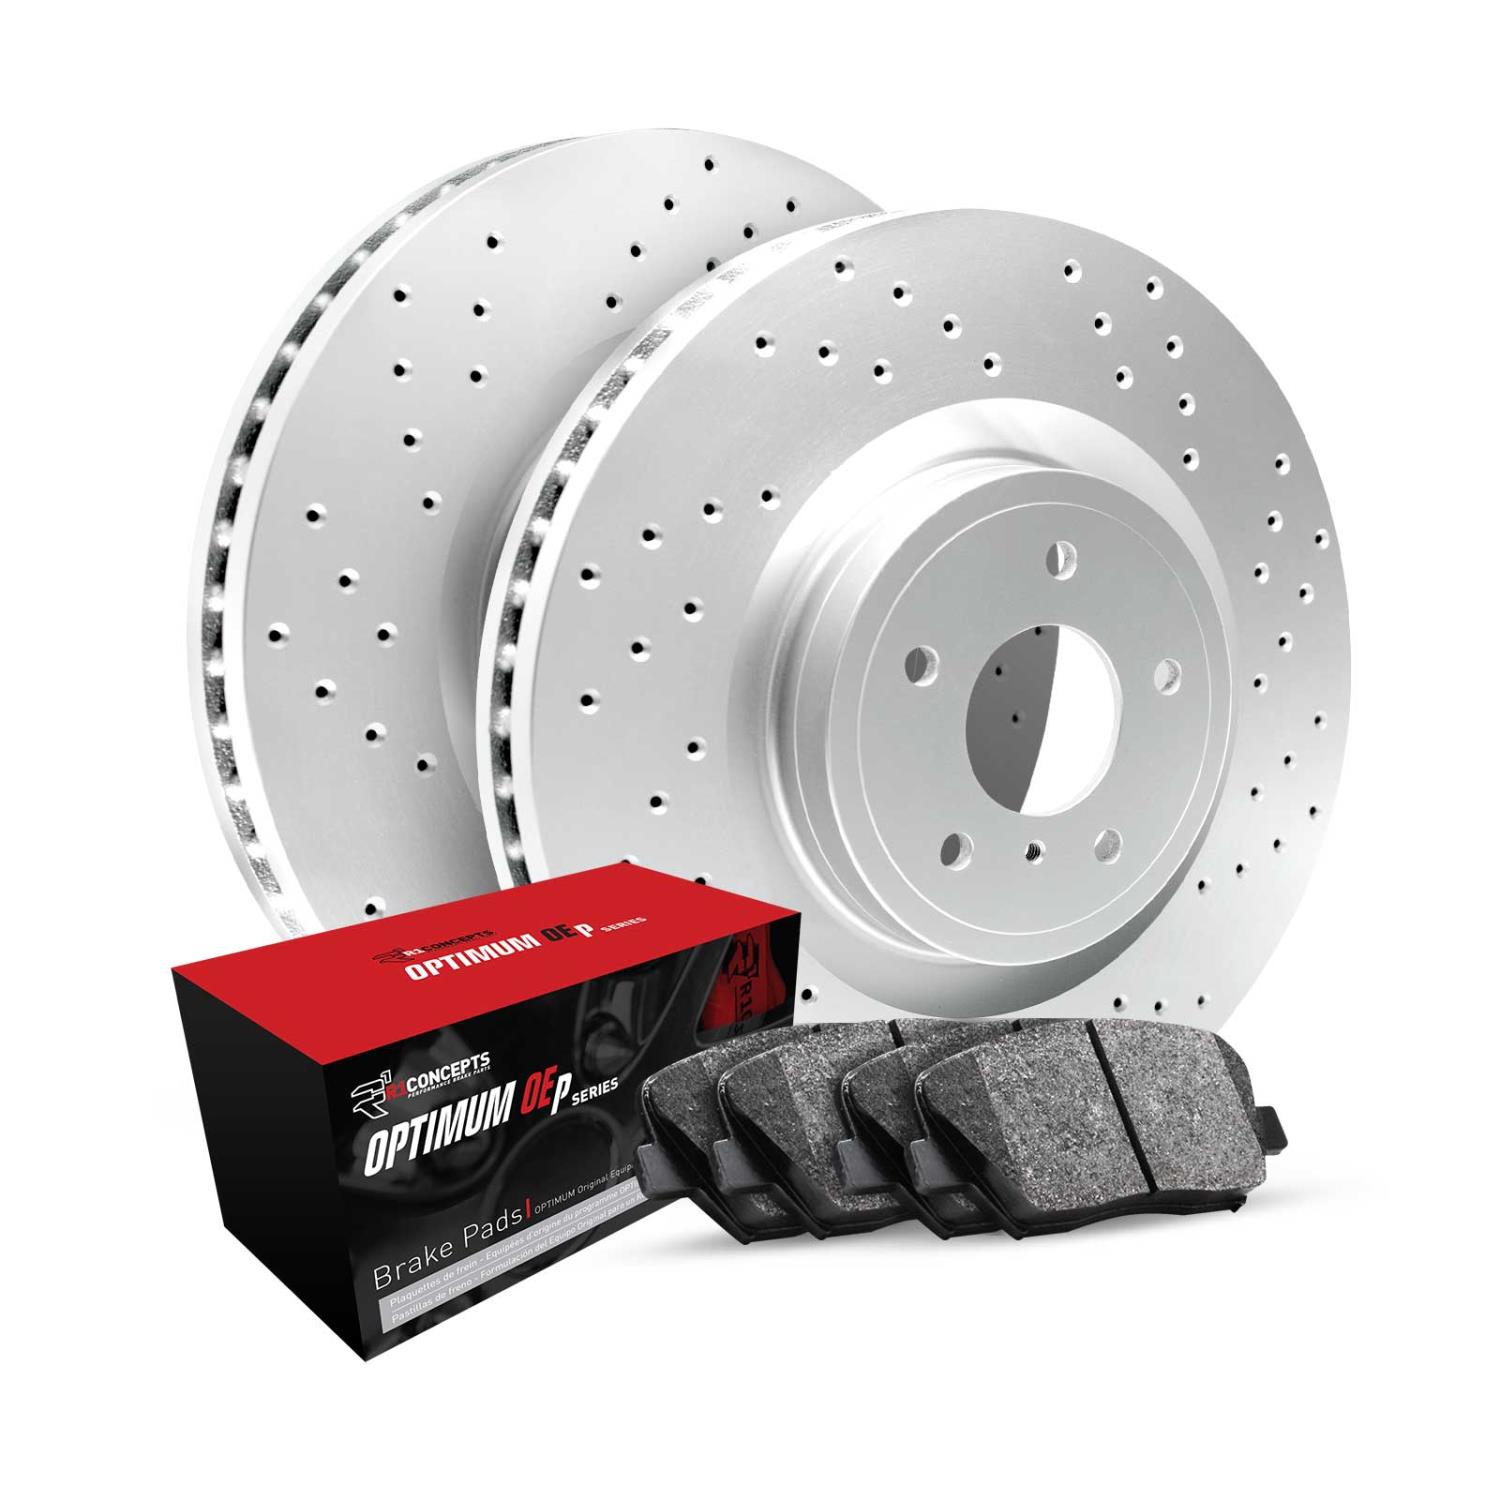 GEO-Carbon Drilled Brake Rotor Set w/Optimum OE Pads, 1994-2005 Fits Multiple Makes/Models, Position: Rear